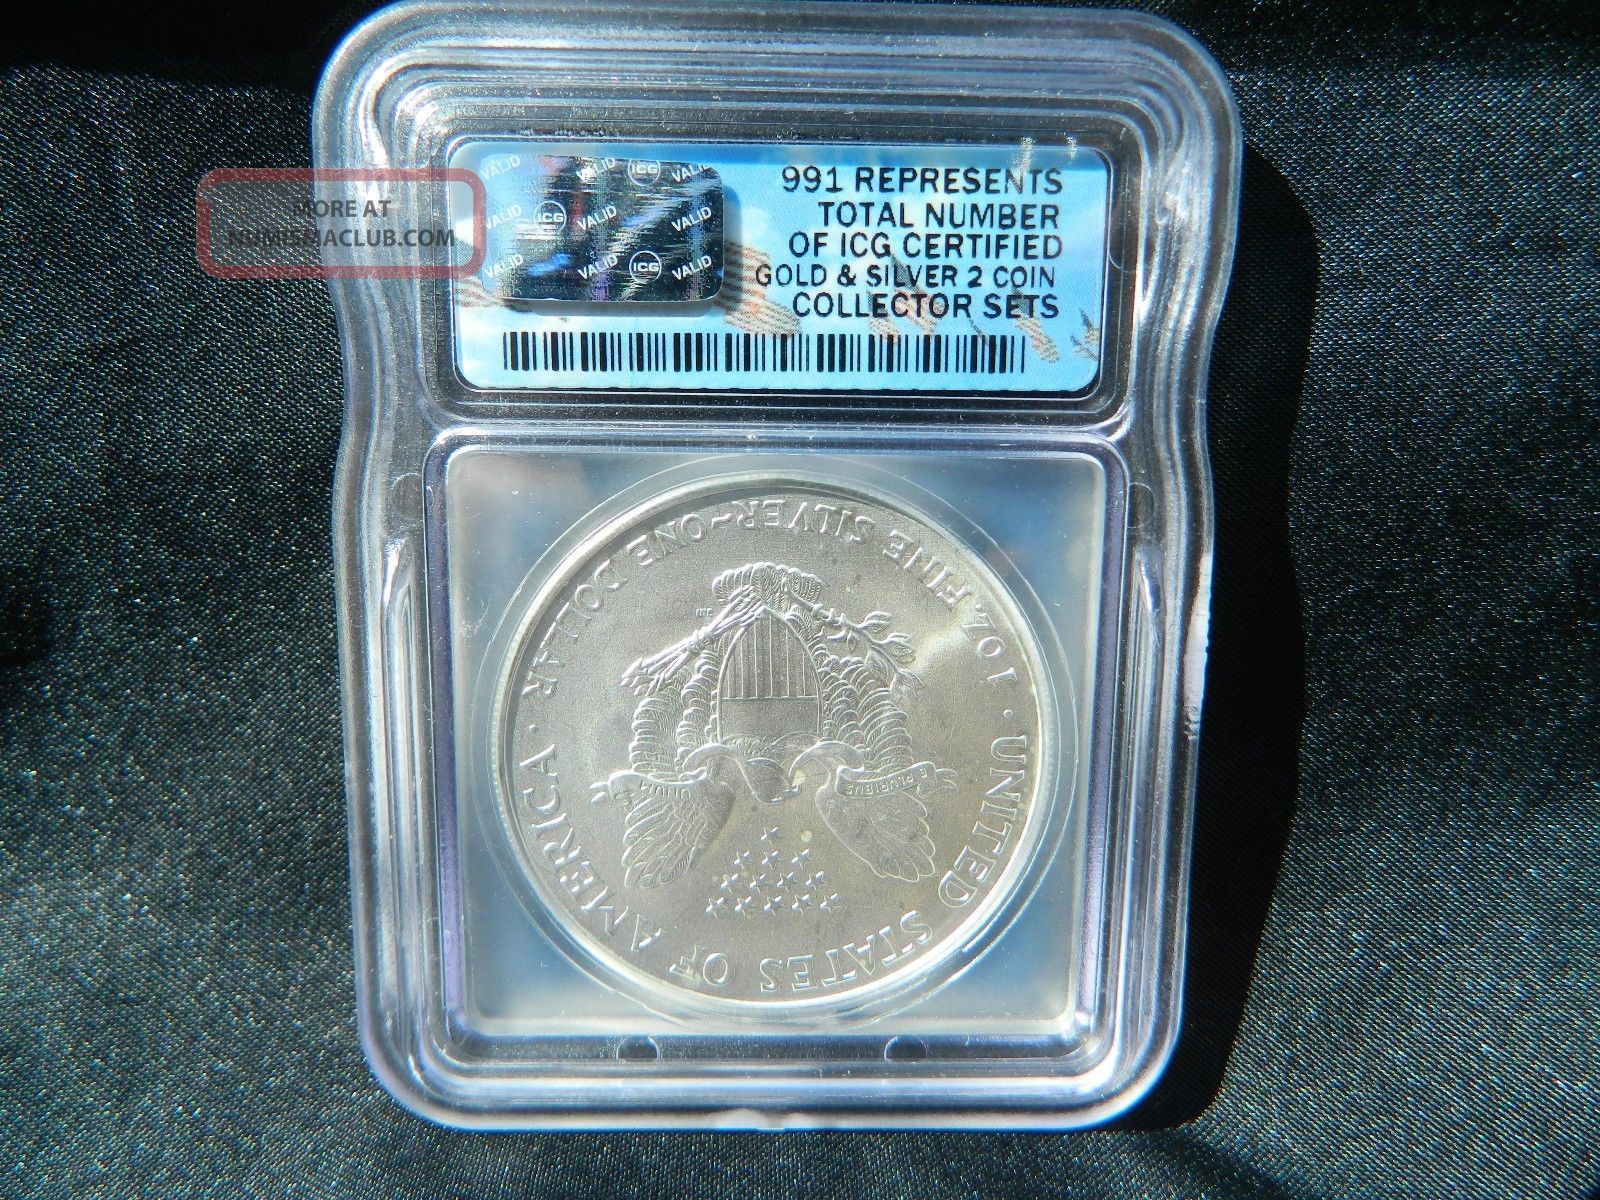 2005 Silver Eagle Icg Ms70 First Day Issue 476